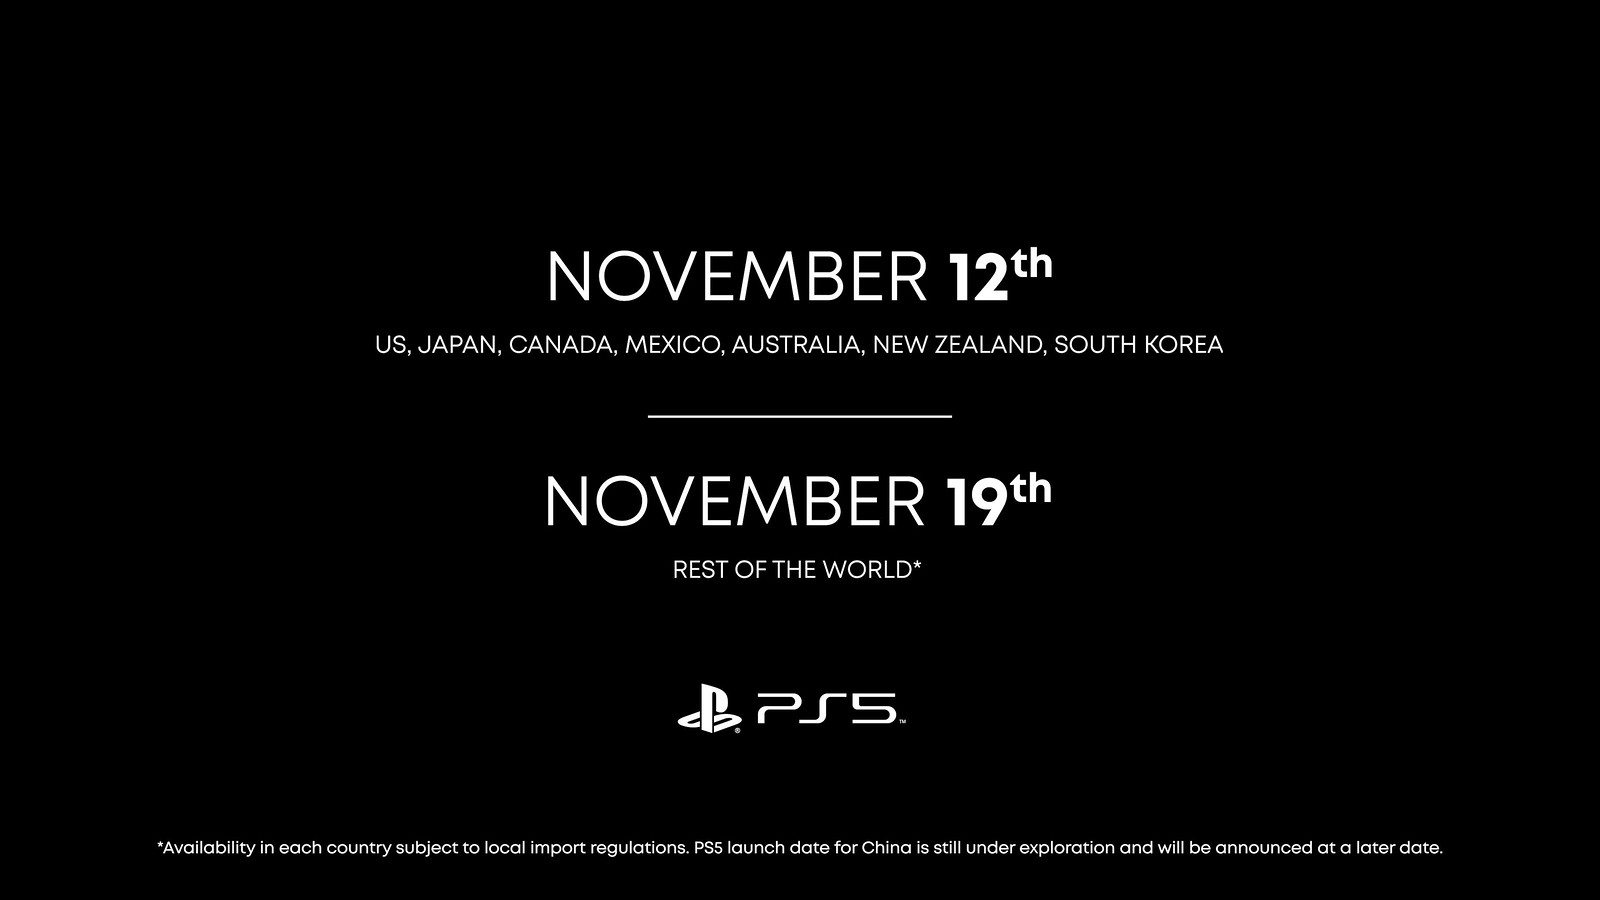 PlayStation 5 November Launch Date and Price Finally Revealed